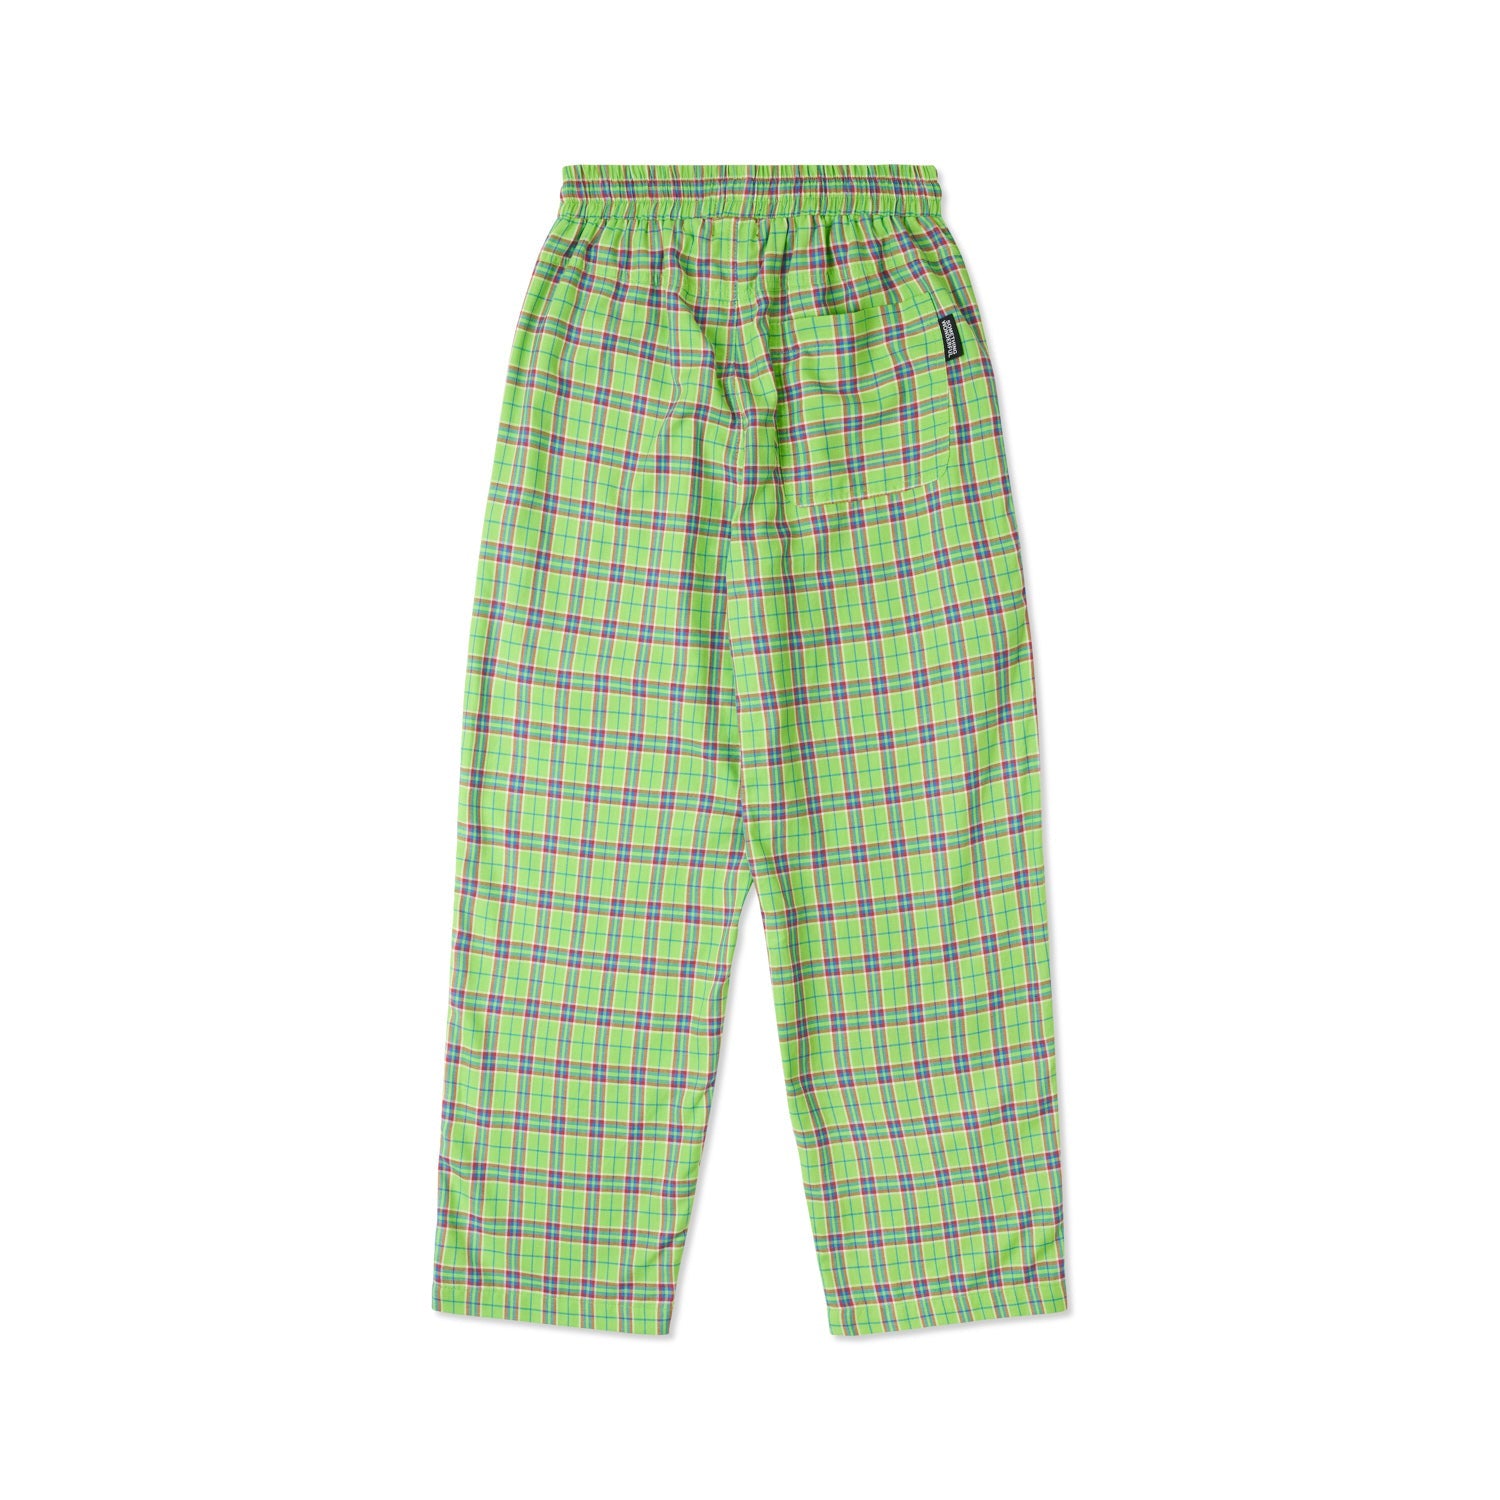 PLAID OUT PANT - GREEN